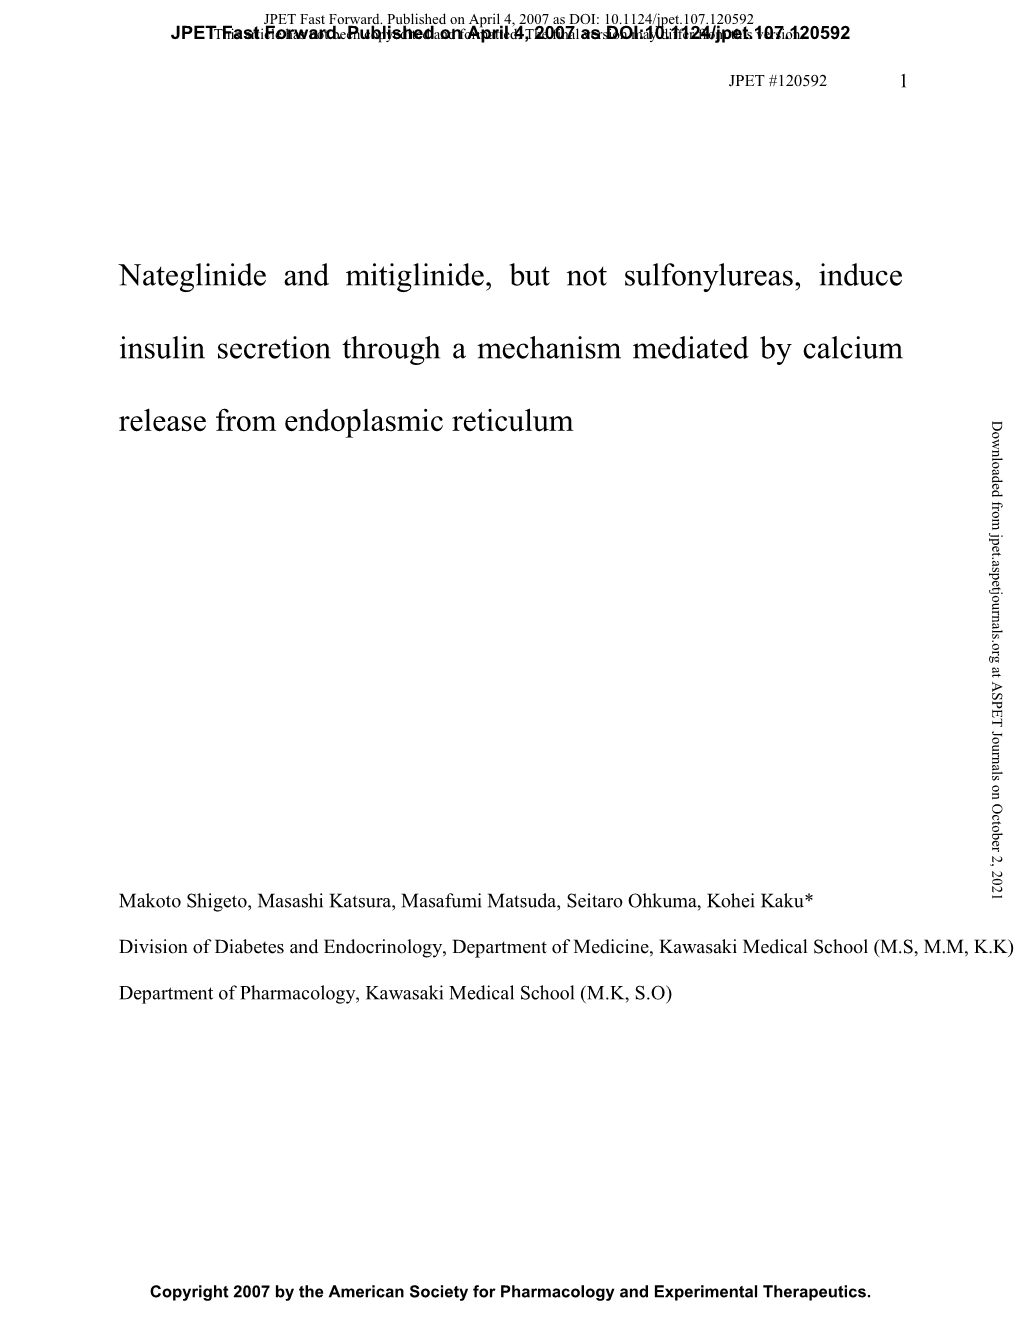 Nateglinide and Mitiglinide, but Not Sulfonylureas, Induce Insulin Secretion Through a Mechanism Mediated by Calcium